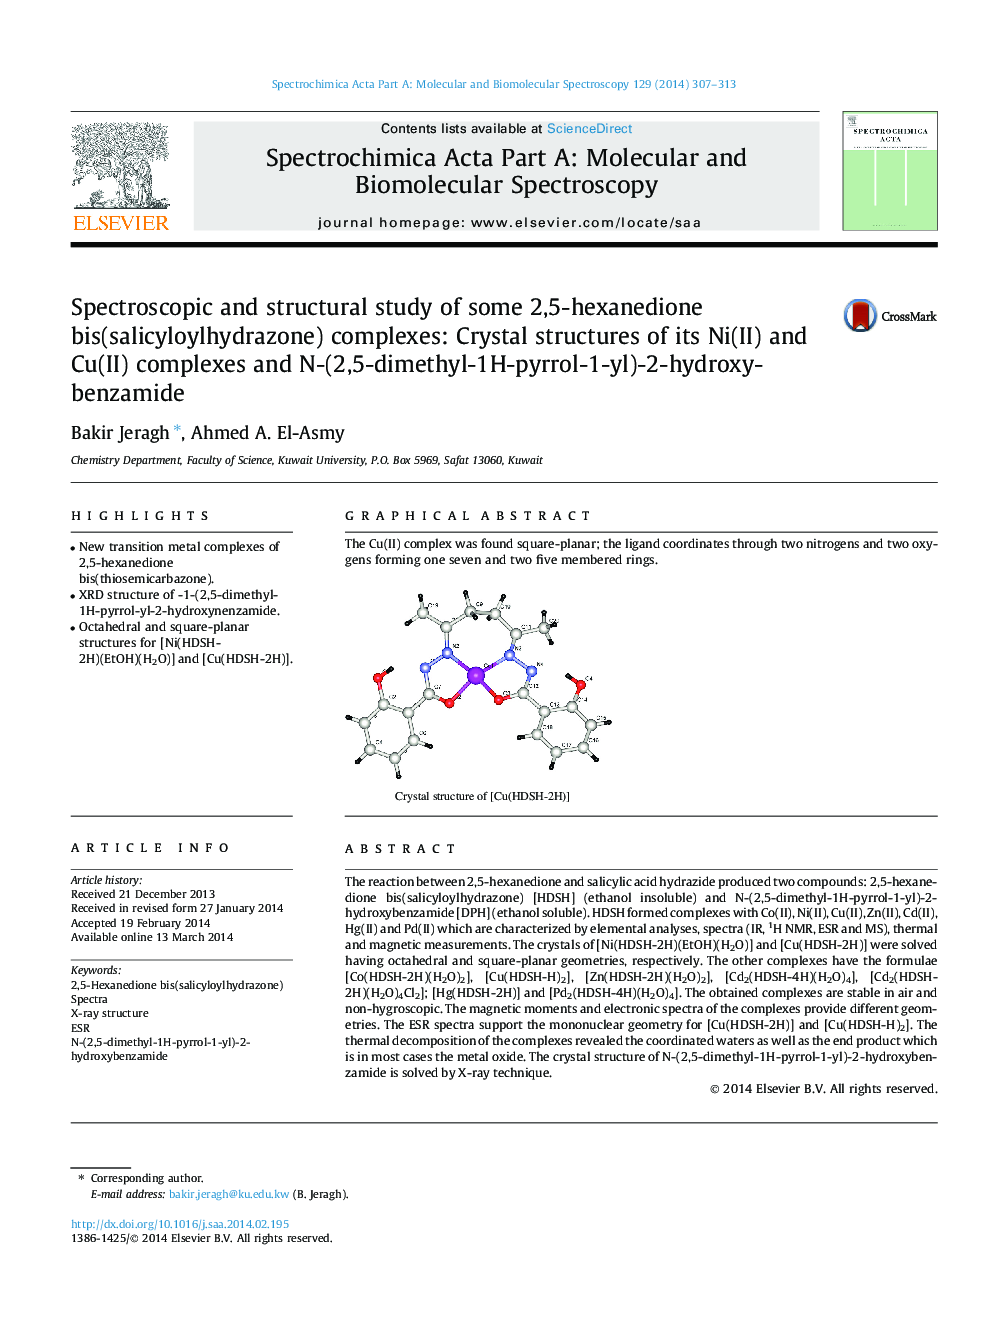 Spectroscopic and structural study of some 2,5-hexanedione bis(salicyloylhydrazone) complexes: Crystal structures of its Ni(II) and Cu(II) complexes and N-(2,5-dimethyl-1H-pyrrol-1-yl)-2-hydroxy-benzamide